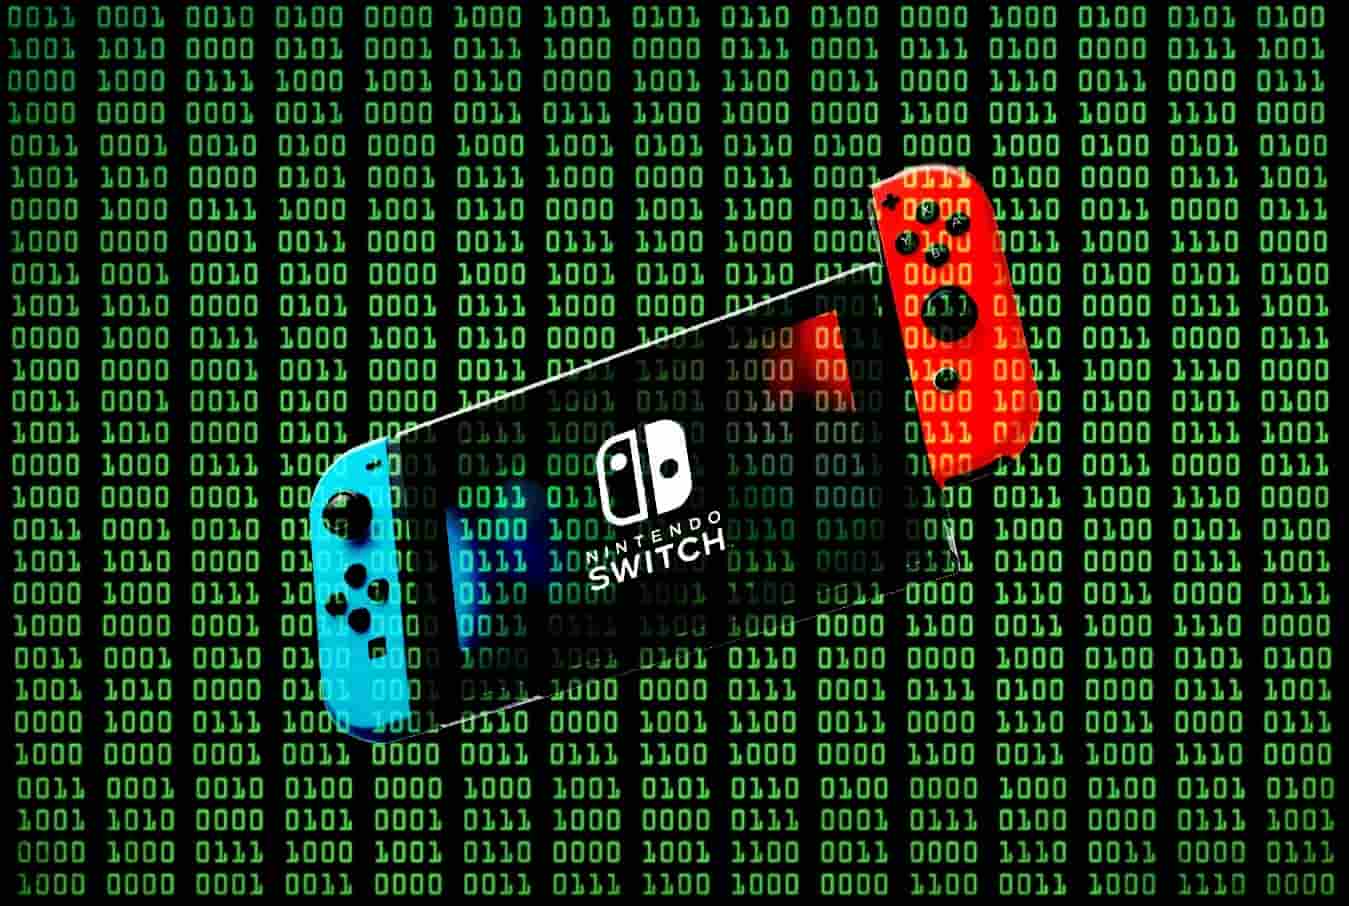 Man pleads guilty to hacking Nintendo & possession of child pornography